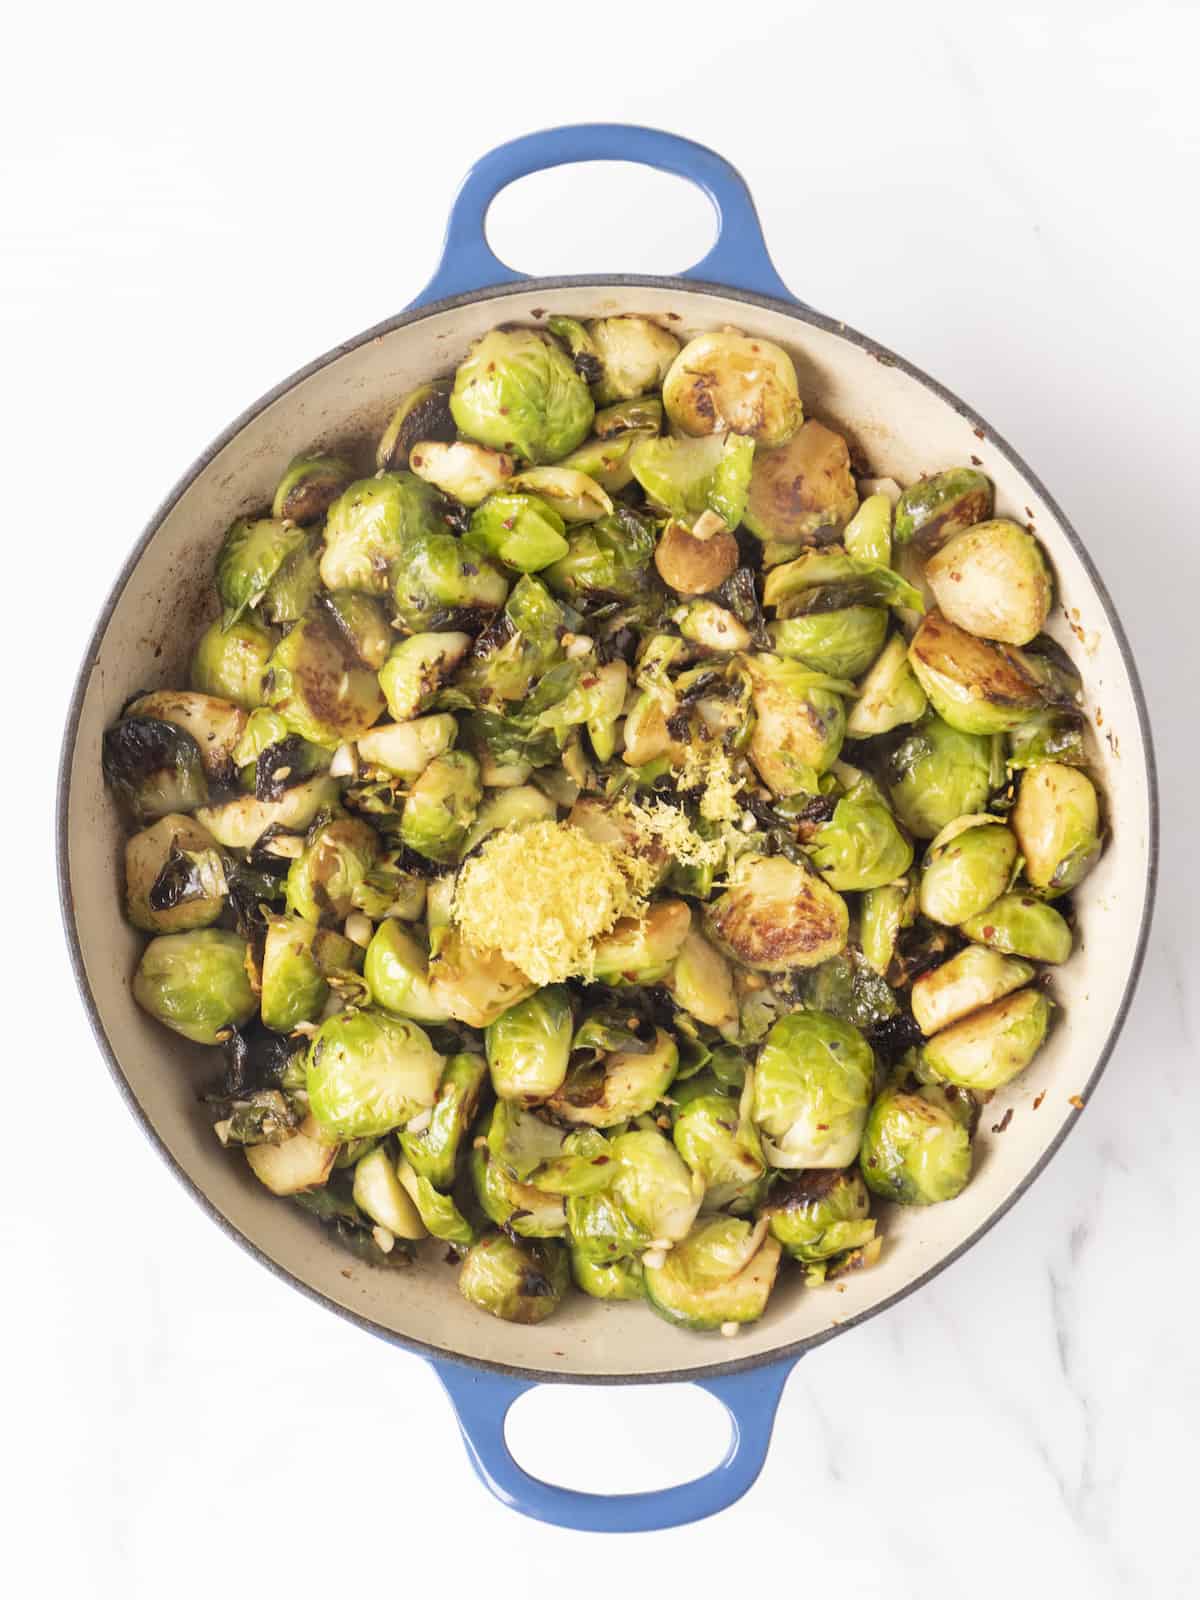 Large blue dutch oven with sautéed brussels sprouts topped with lemon zest.